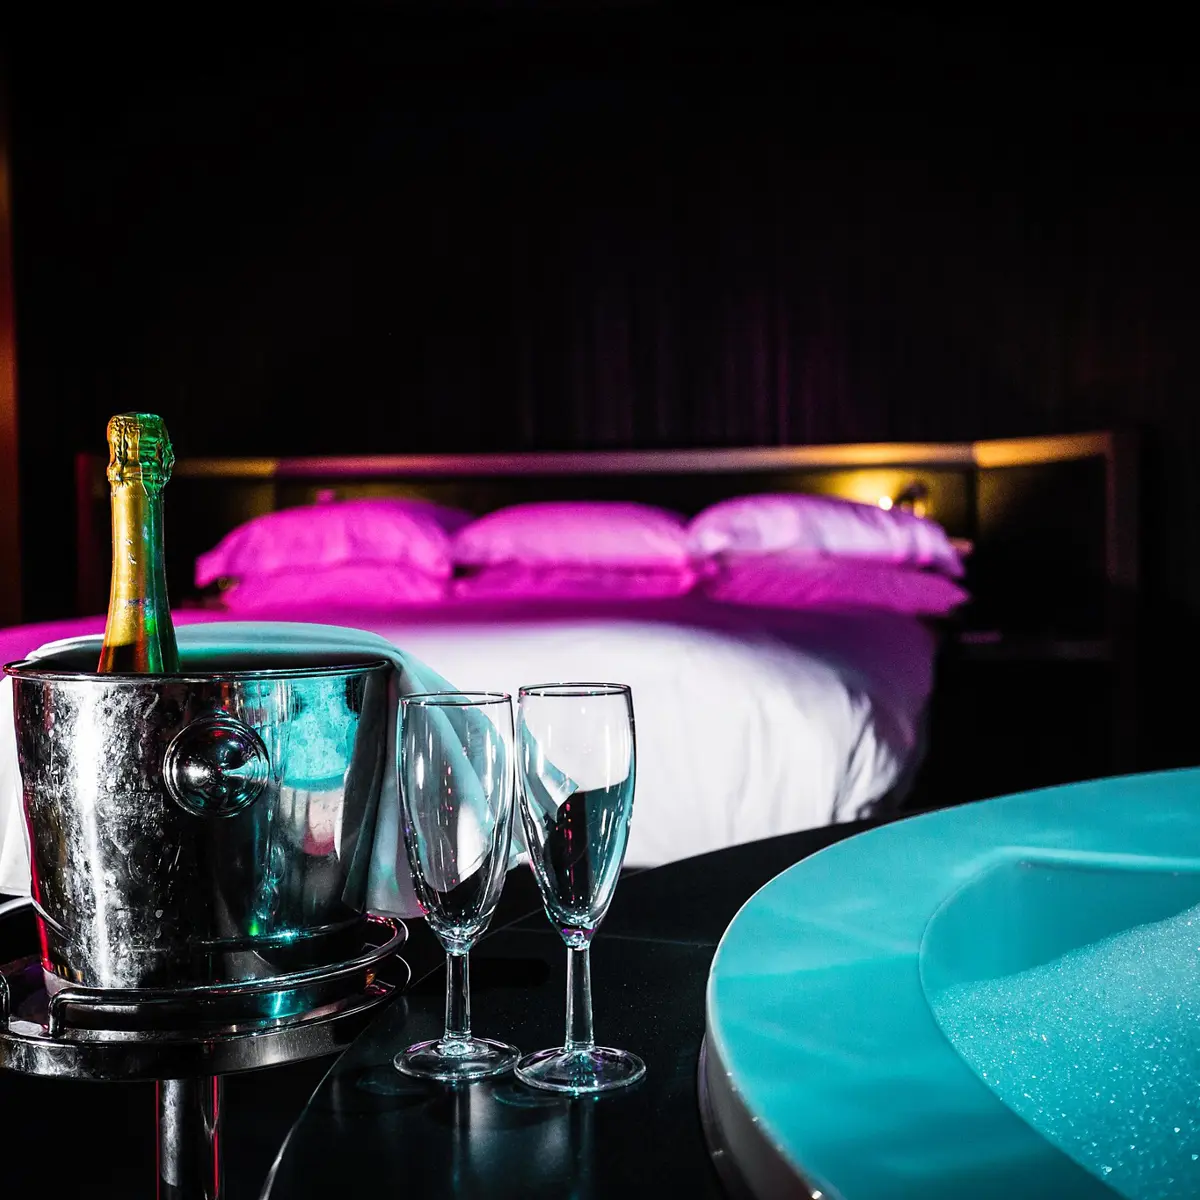 Table with champagne and 2 champagne glasses in front of a bed.